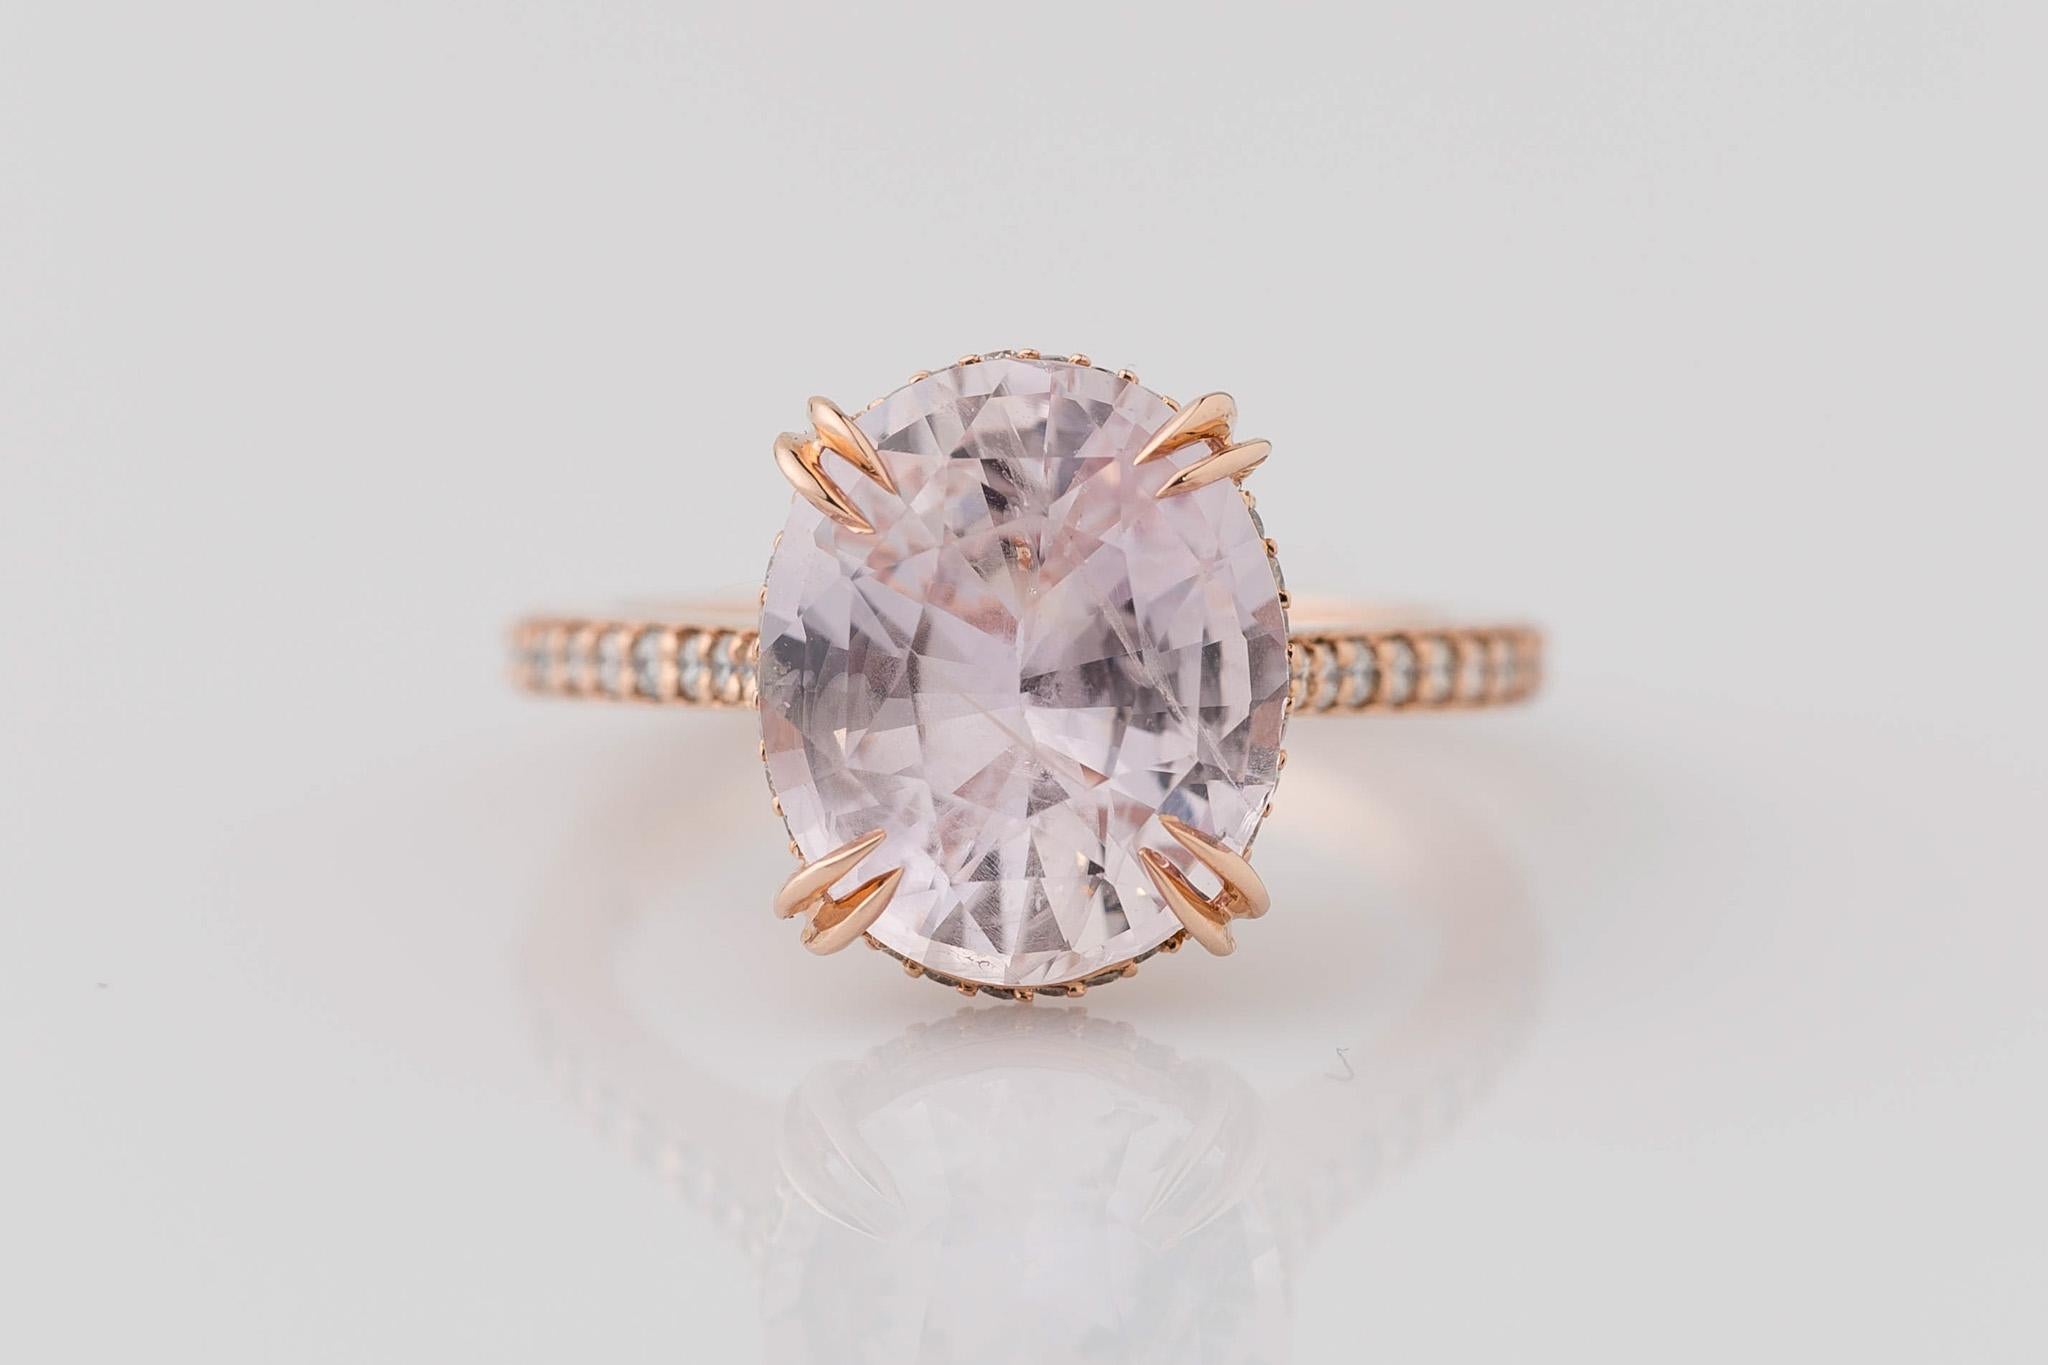 Prepare to say 'I do' with our enchanting GIA Certified 5.22 carat natural oval pink sapphire diamond engagement ring. The centerpiece boasts a delicate, light pale pink hue, radiating love and romance. Adorned with 18 dazzling round brilliant cut